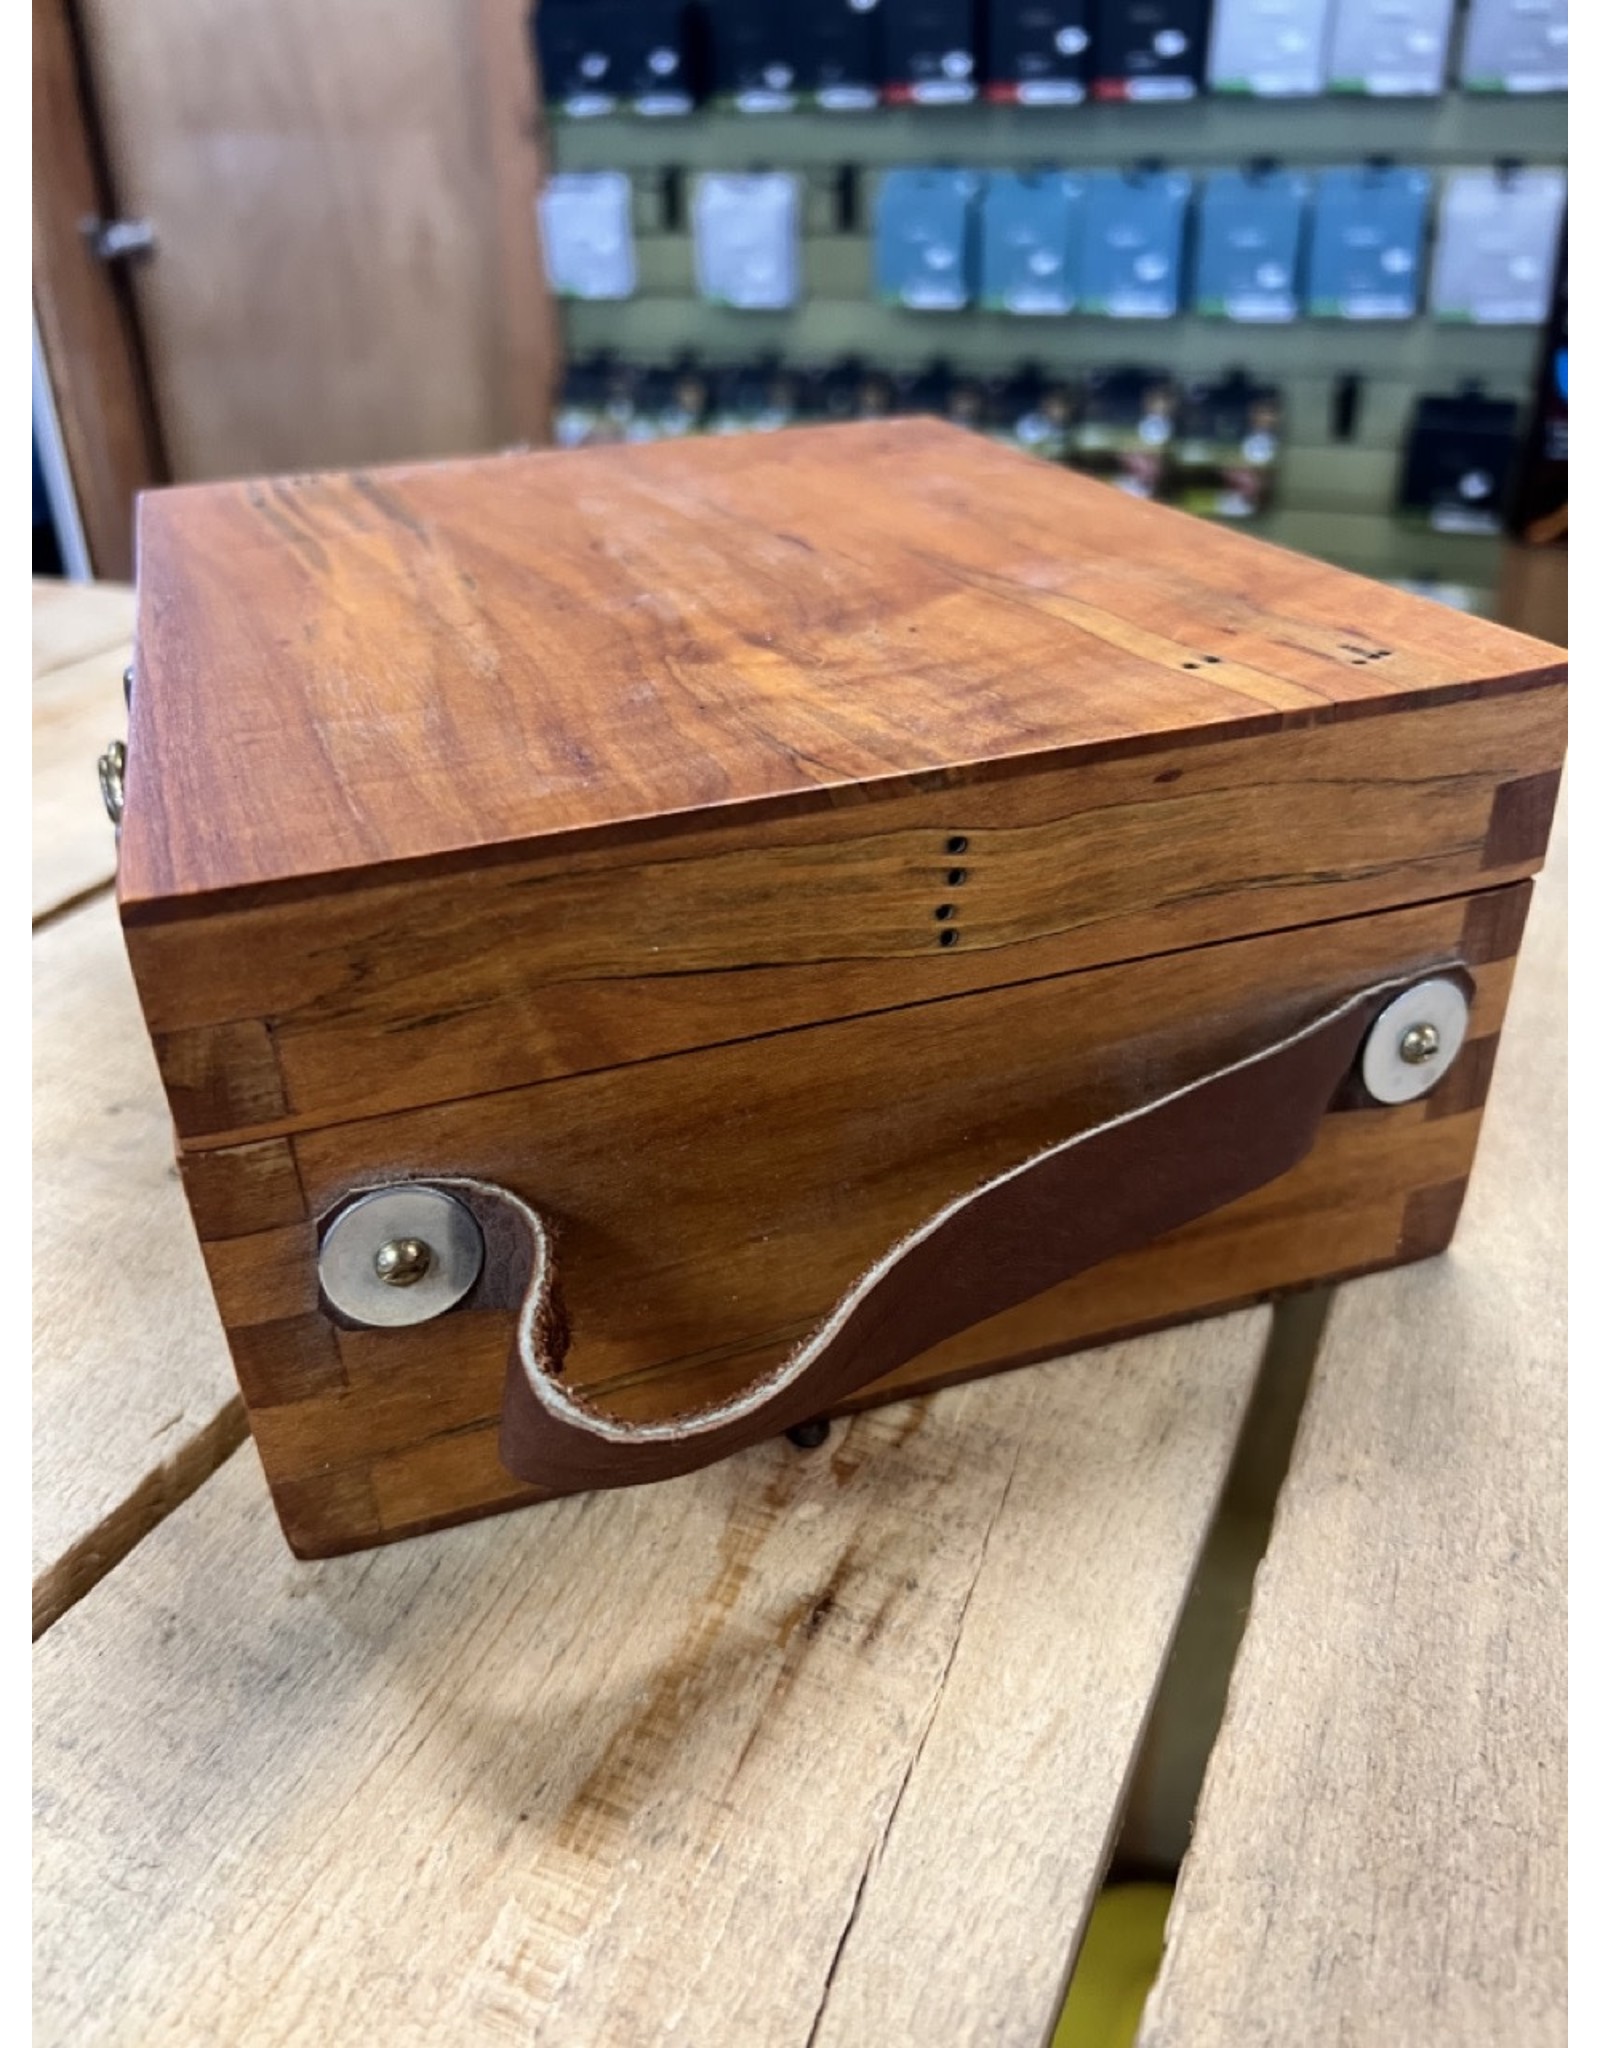 Handcrafted Wooden Fly Storage Box (Hardwood)